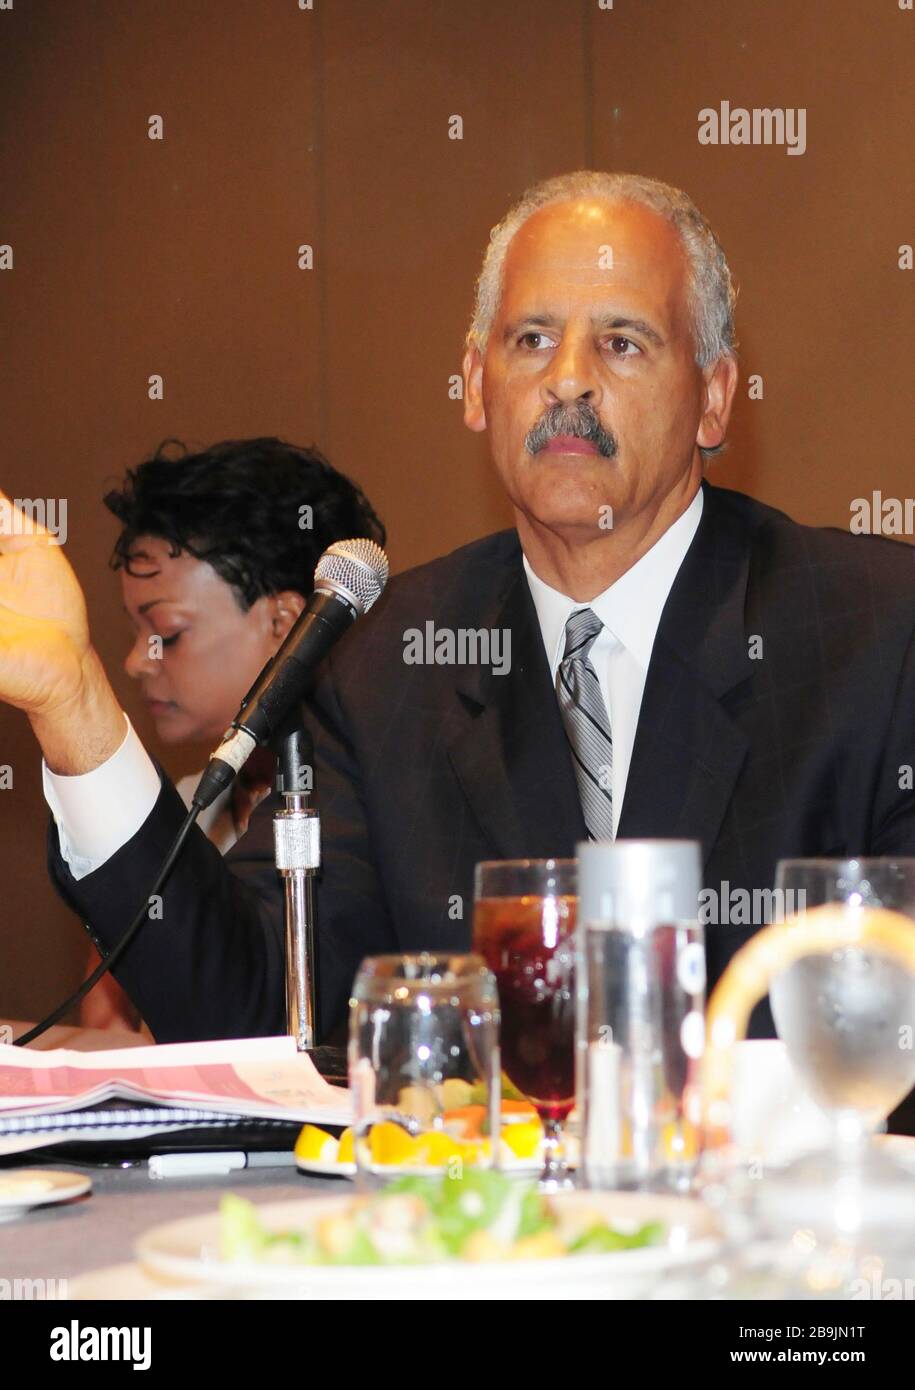 ***FILE PHOTO*** Oprah Winfrey Announces Boyfriend Stedman Graham Is Practicing Social Distancing After Traveling.  HOLLYWOOD, FL - MARCH 18: Stedman Graham attends The Jazz in the Gardens Women's Impact Luncheon at The Westin Diplomat Resort and Spa on March 18, 2011 in Hollywood, Florida. (photo by: MPI10/MediaPunch Inc.) Stock Photo